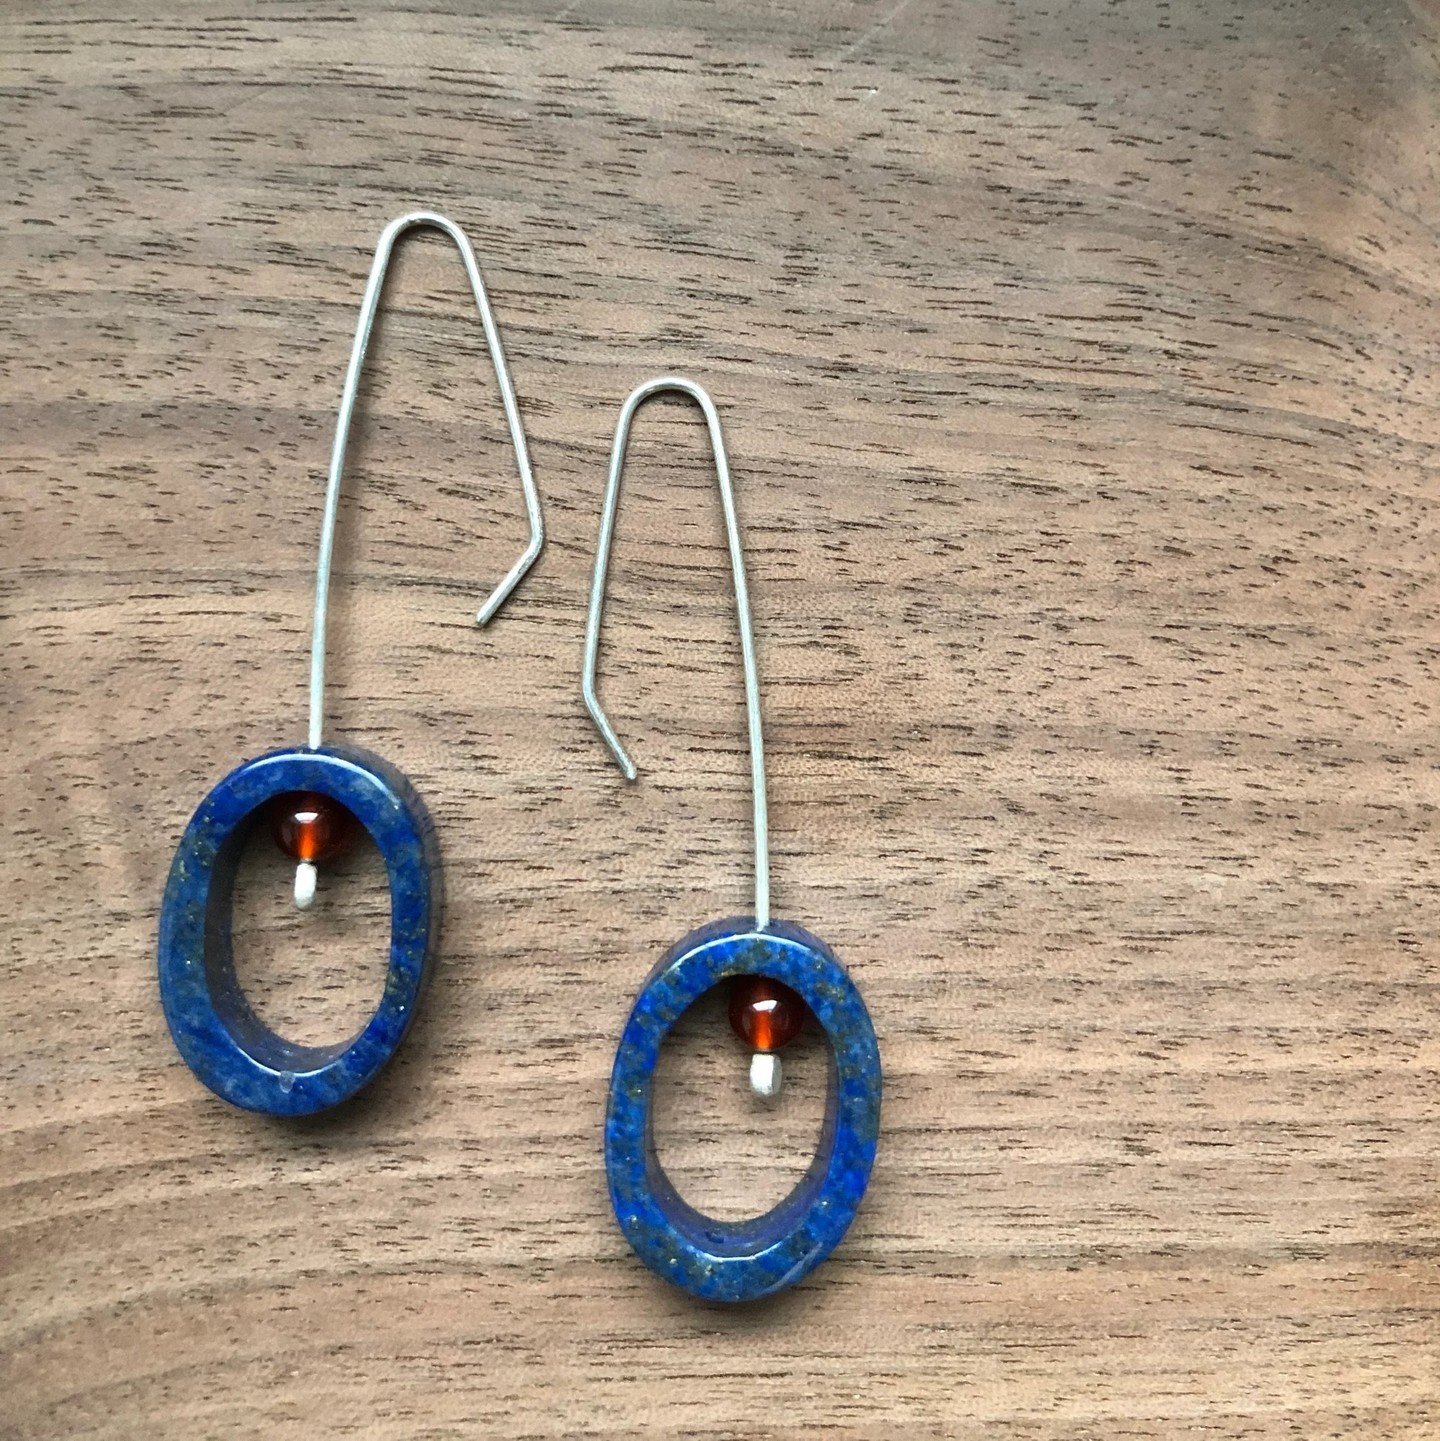 We are happy that Kit Burke-Smith will be back with us at the Stone Avenue Stop for the spring Craft Crawl! She uses traditional hand-fabricated metalsmithing methods to create jewelry designs that reflect nature and are both minimalist and sculptura